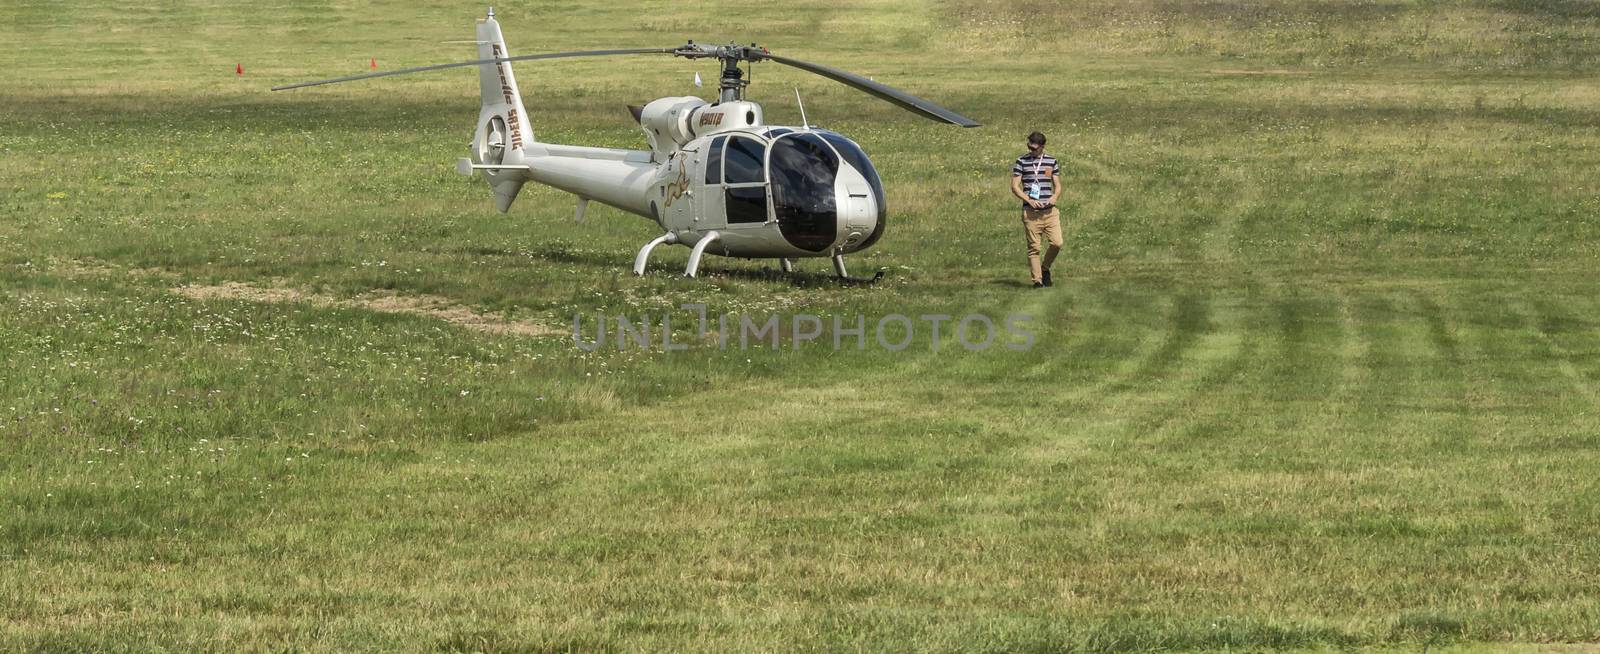 Belarus, Minsk - July 23, 2018: Helicopters of the teams of participants of the 16th World Helicopter Championships and the 4th stage of the World Cup in helicopter racing in Minsk (Belarus)